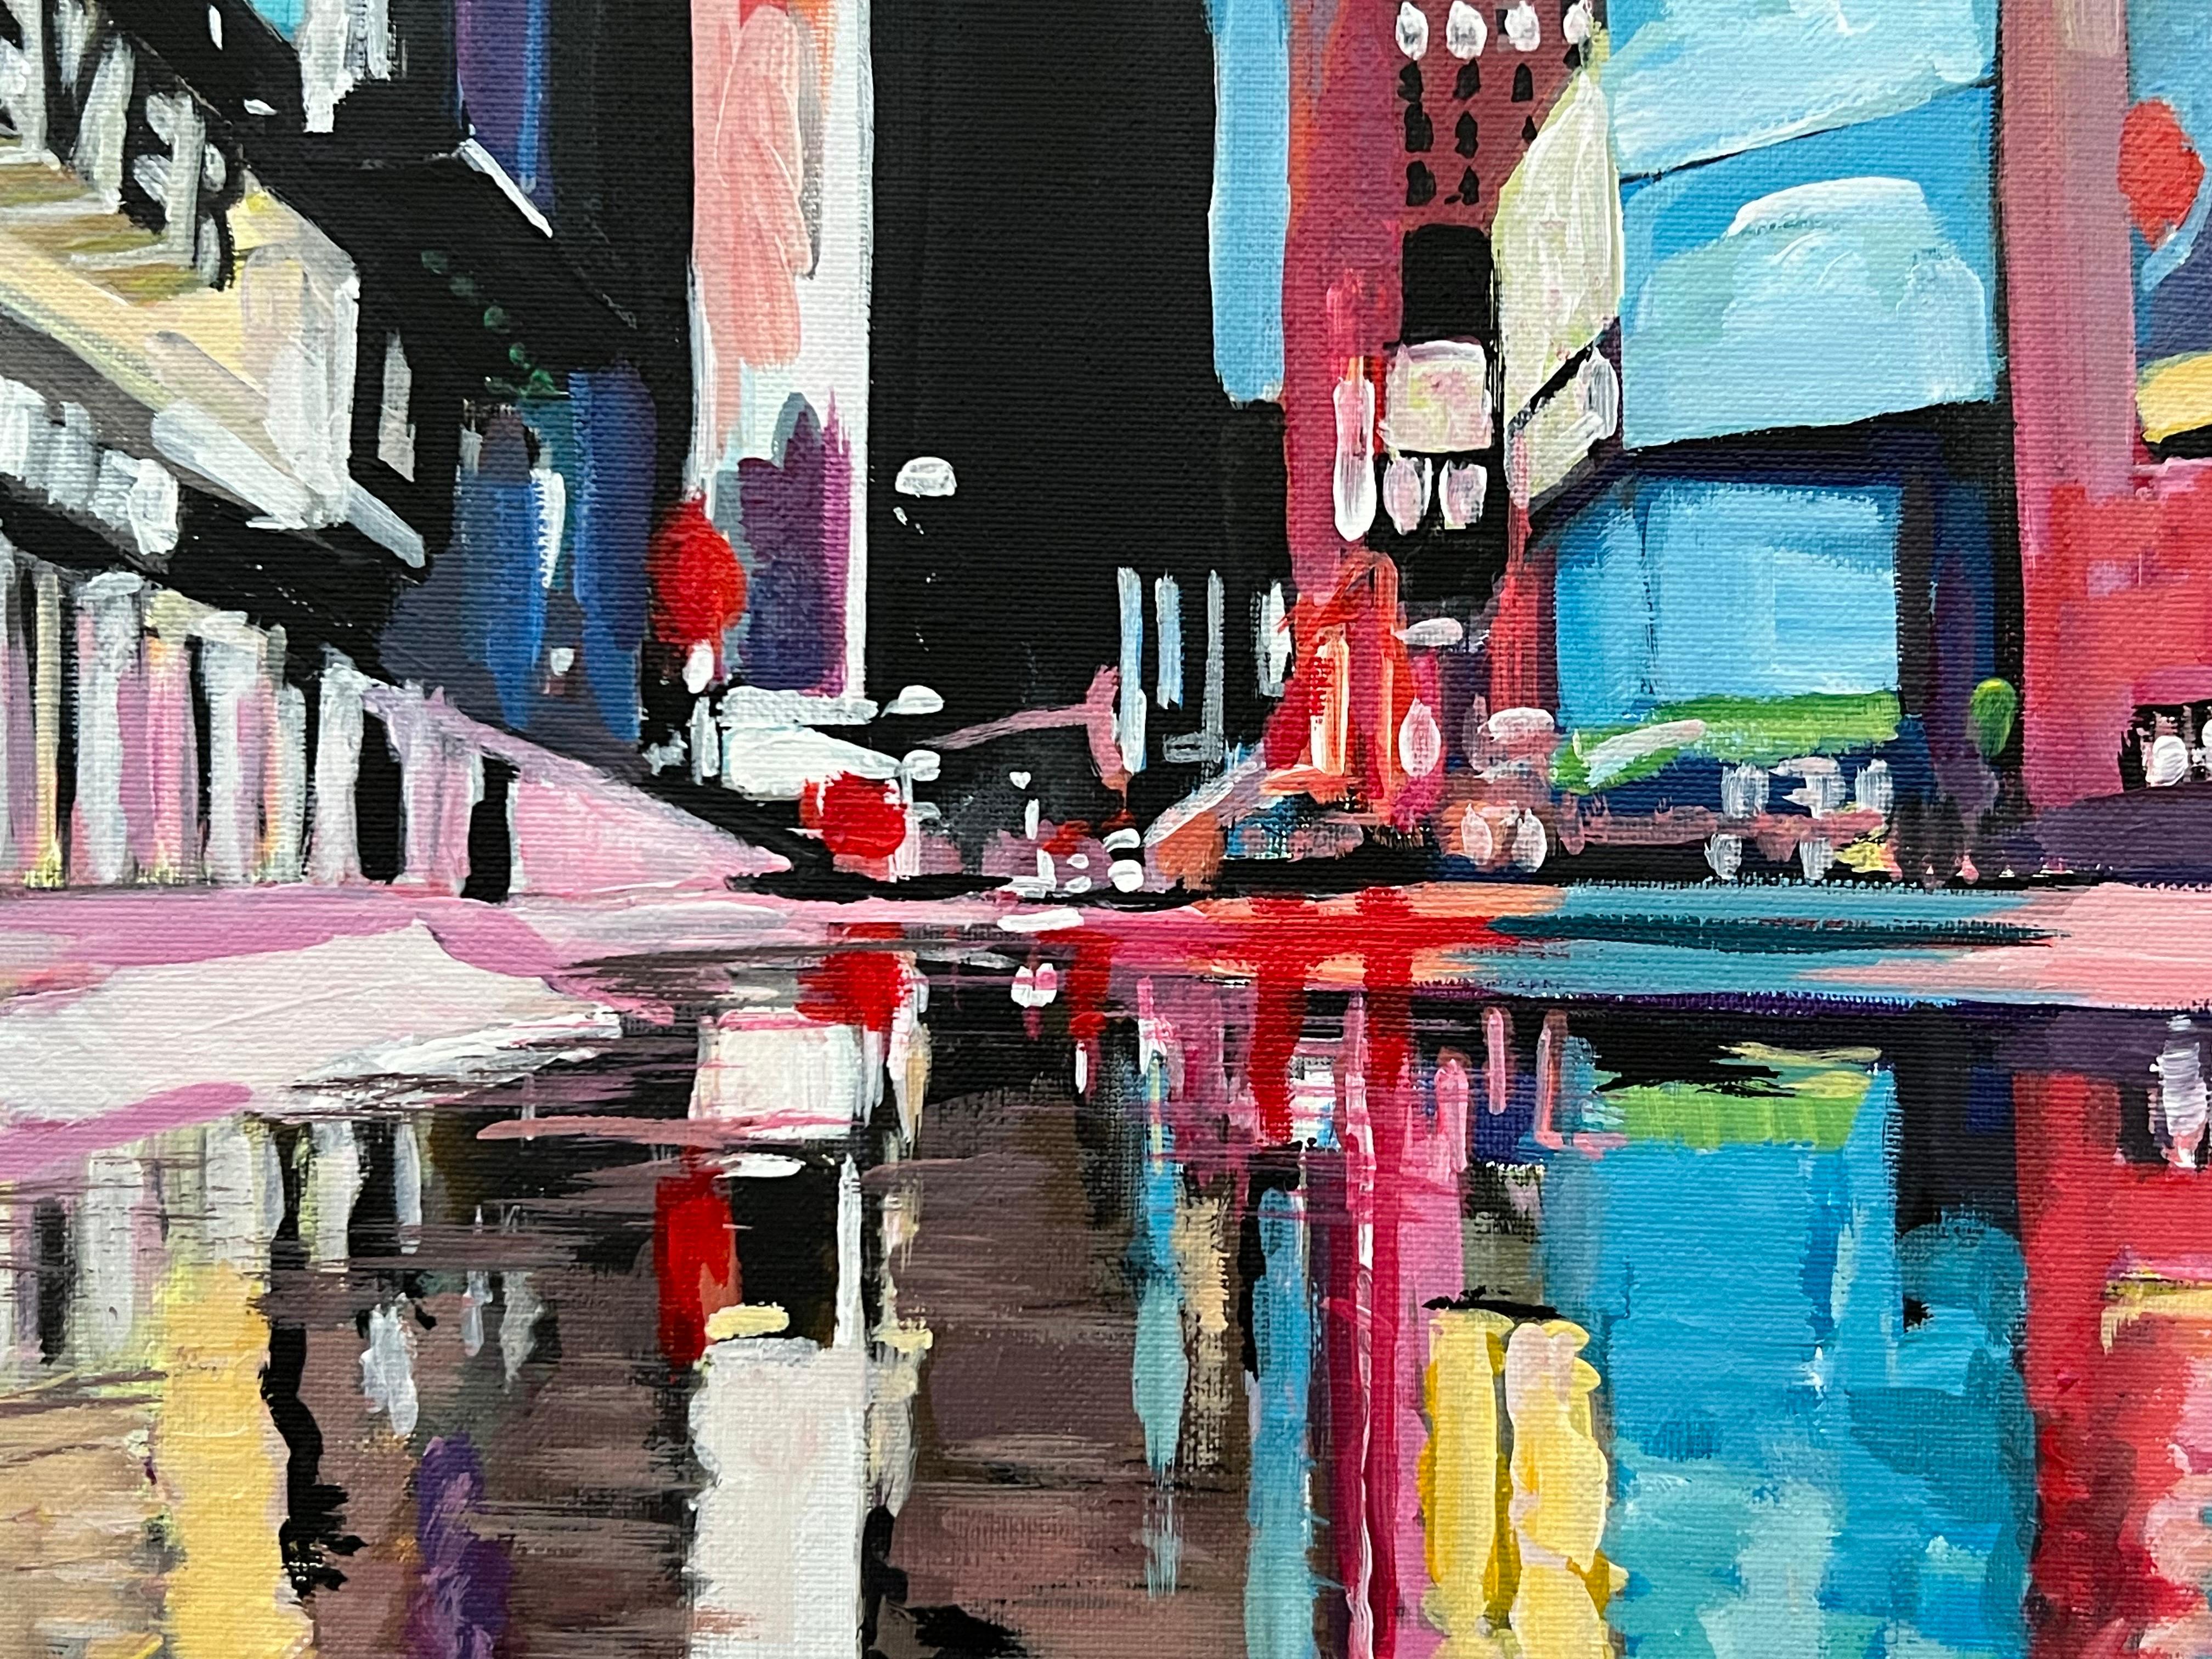 Times Square New York City Reflections after the Rain II by British Urban Artist For Sale 7